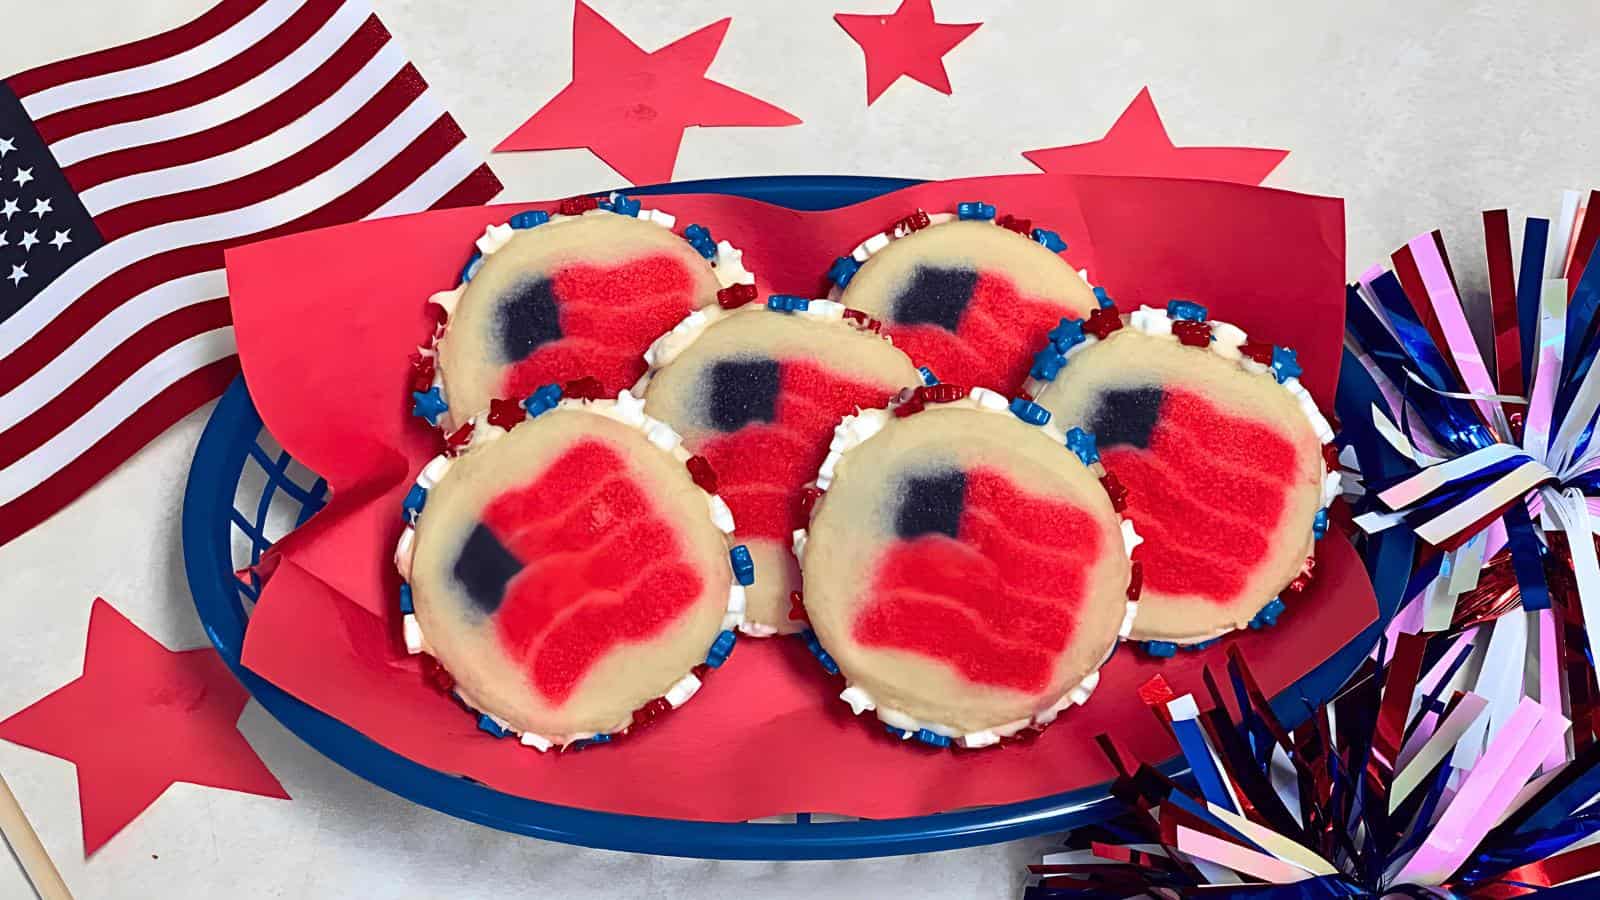 <p>These cookie sandwiches are a festive treat for any summer pool party, featuring red, white, and blue colors. Simple to make, they bring a patriotic flair to your snack table. The creamy filling between two cookies offers a delightful bite that guests will love. Perfect for celebrating national holidays or just adding a splash of color to your event. These sandwiches are a sweet and fun way to enjoy the day by the pool, making them ideal for poolside treats.<br><strong>Get the Recipe: </strong><a href="https://eventstocelebrate.net/stars-and-stripes-patriotic-cookie-sandwiches/?utm_source=msn&utm_medium=page&utm_campaign=msn" rel="noopener">“Stars and Stripes” Patriotic Cookie Sandwiches</a></p>